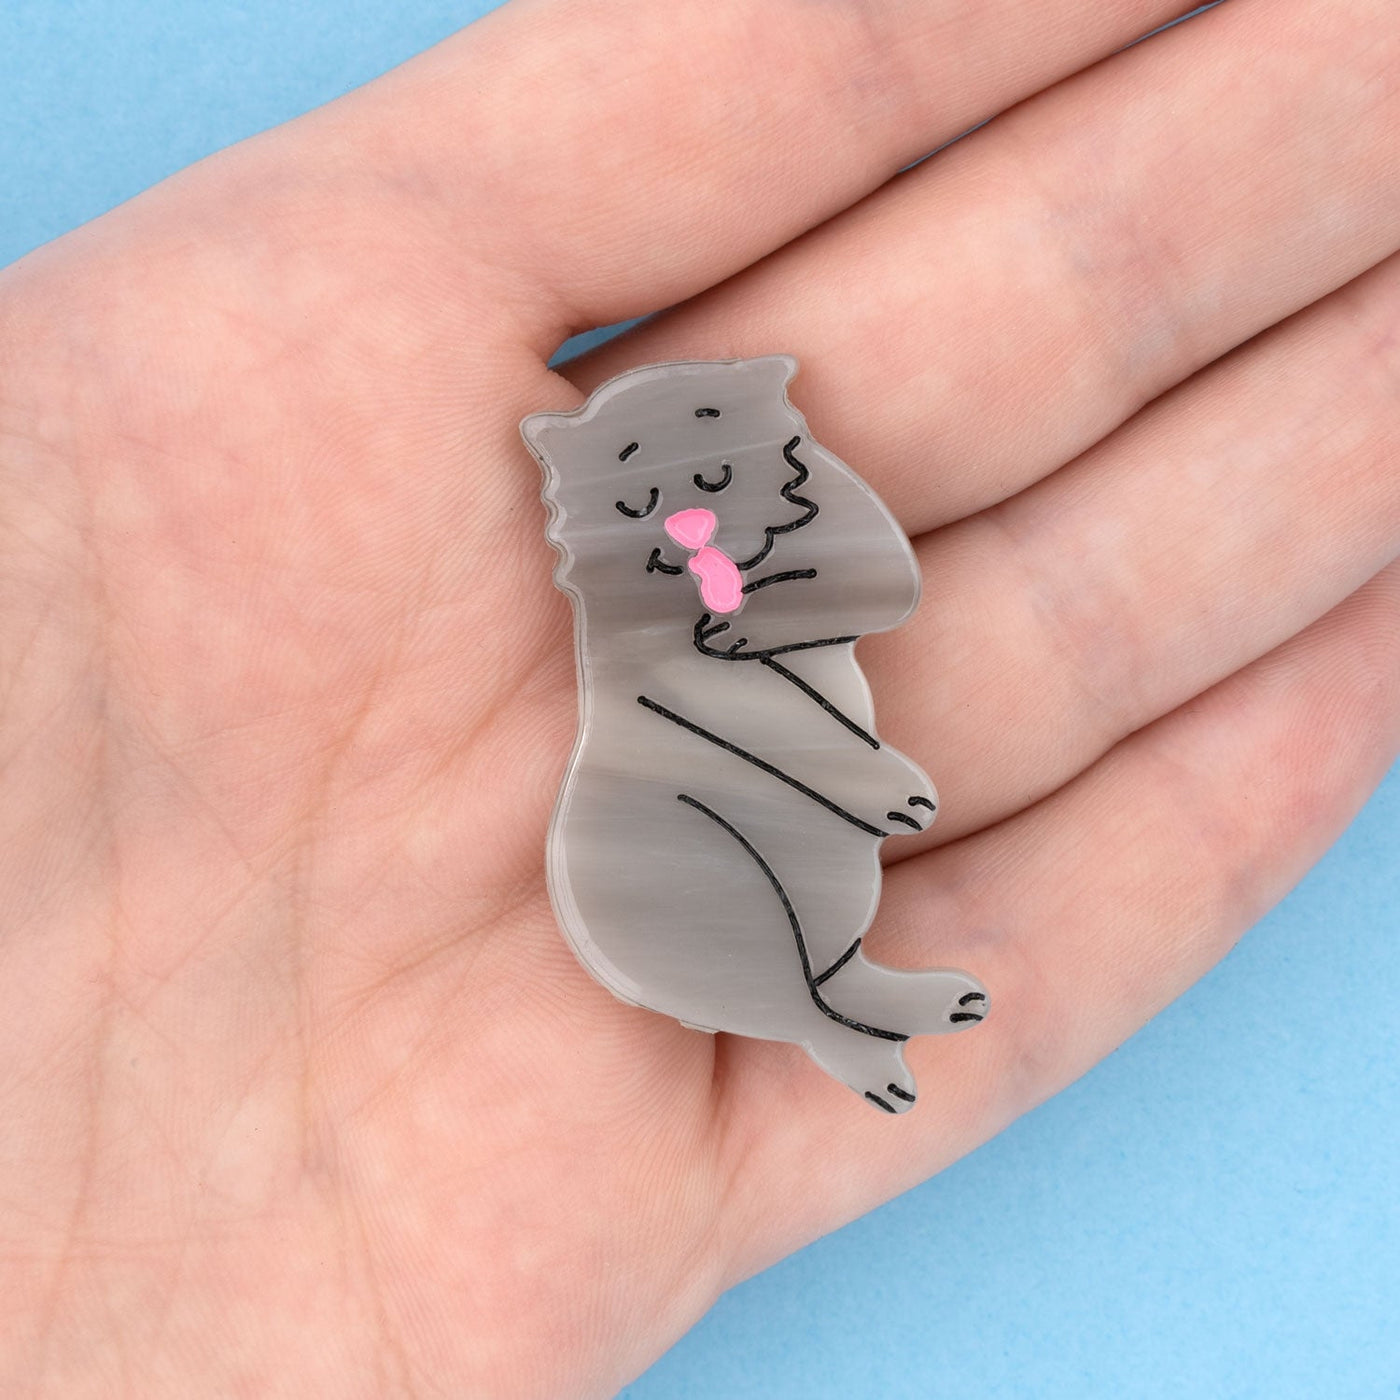 【Coucou Suzette】Grey Cat Hair Clip グレーの猫ヘアクリップ  | Coucoubebe/ククベベ